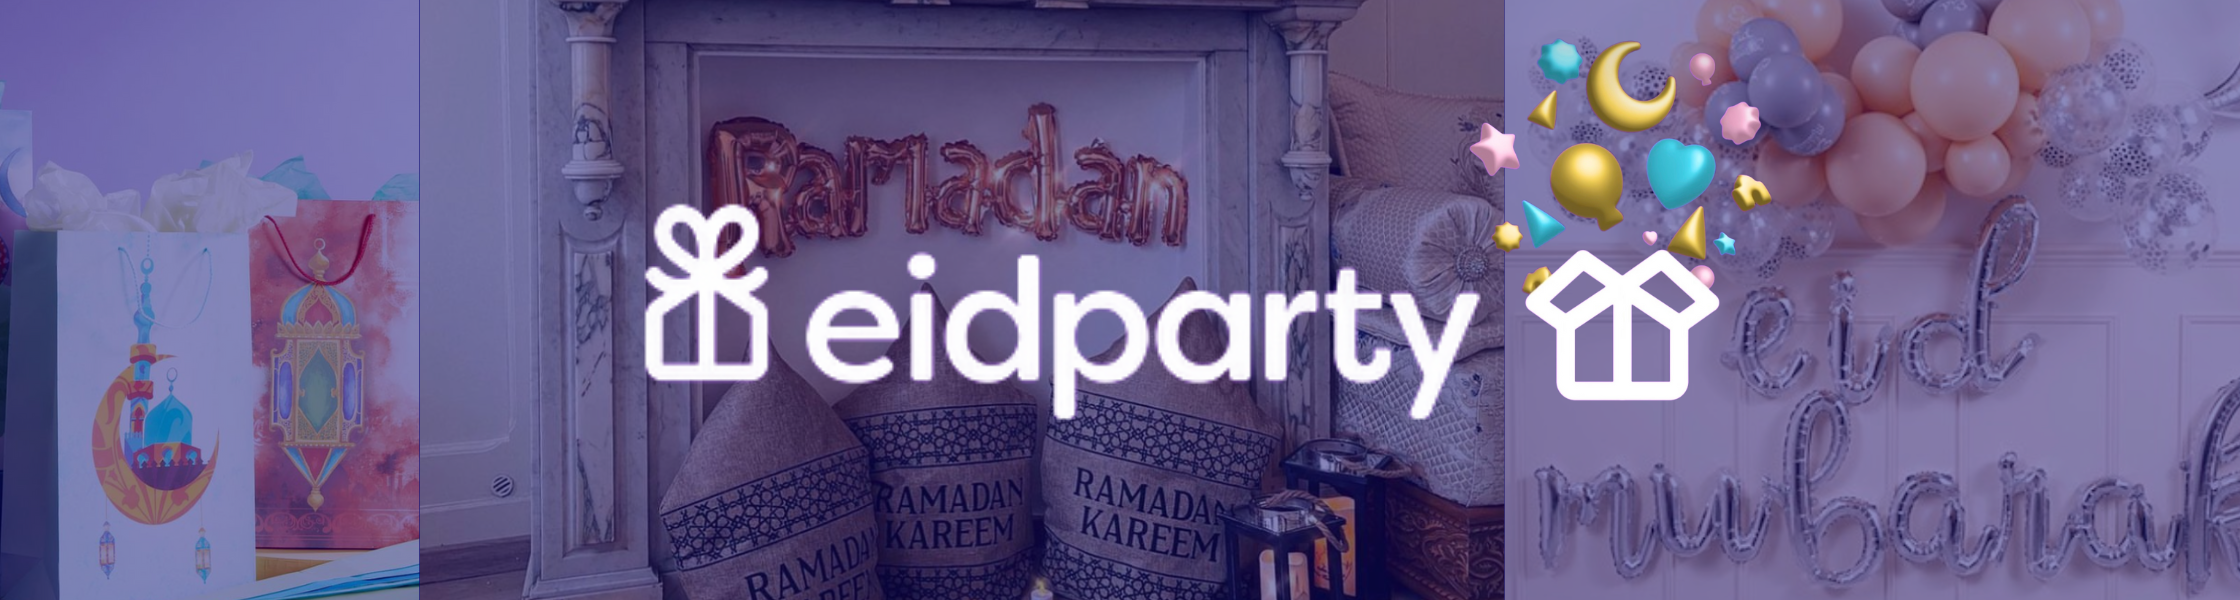 Founder of EidParty, Riz: "I was Desperate for our Muslim Communities to Feel Valued & Seen"